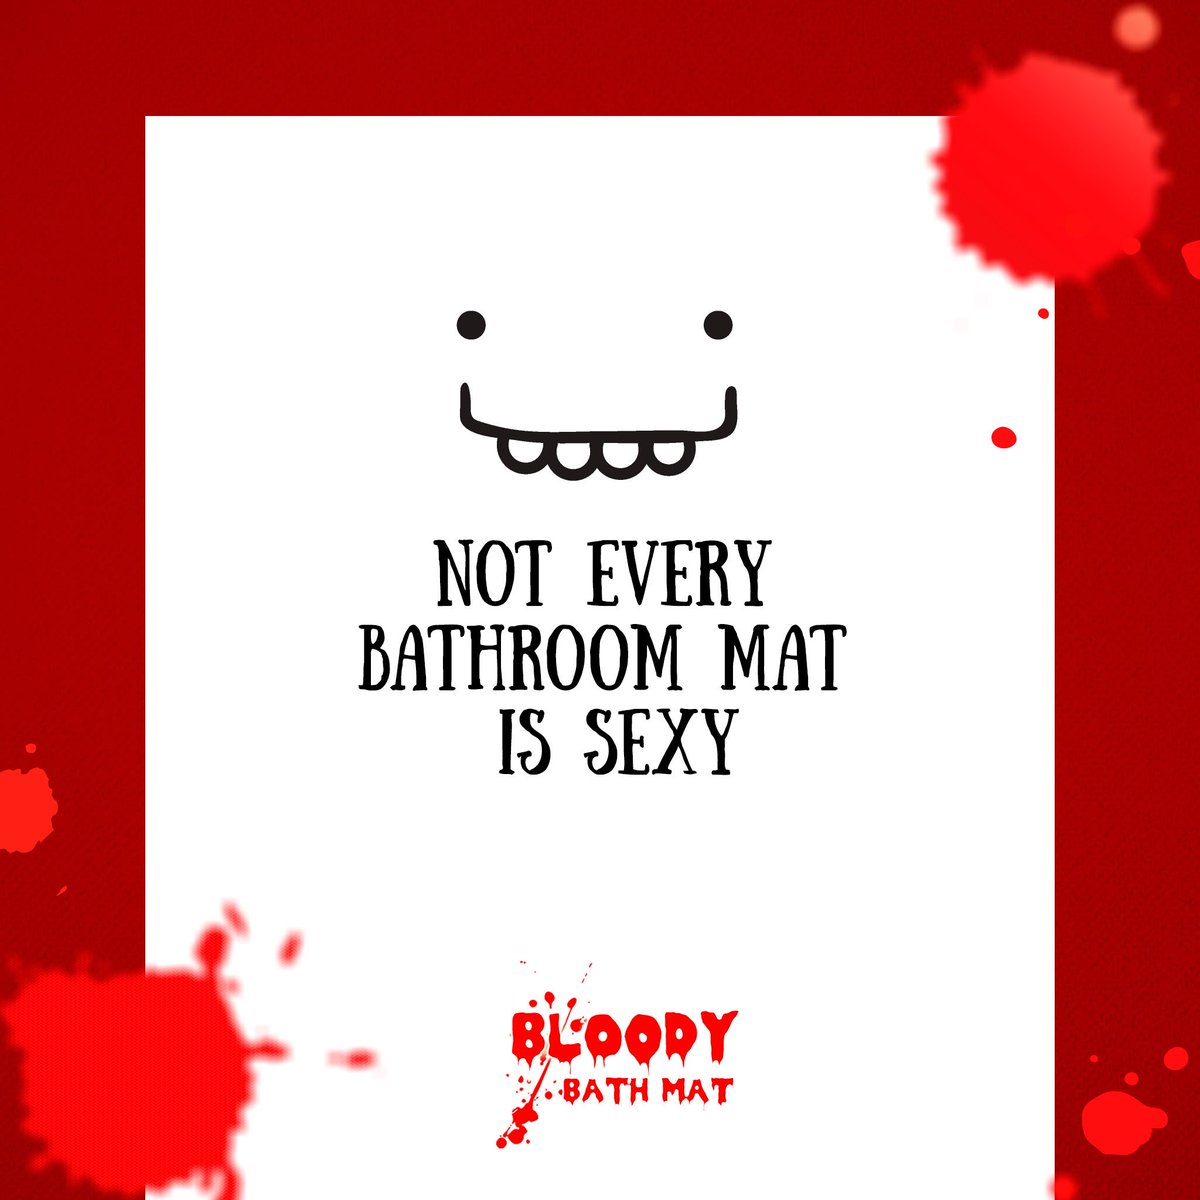 Not every bathroom mat is sexy. Ours is bloody awesome - meet the Bloody Bath Mat™ #bloodybathmat #halloween2019 #comedy #scaryprank #iwantoneofthose #joking #horror

-Posted by OneUp